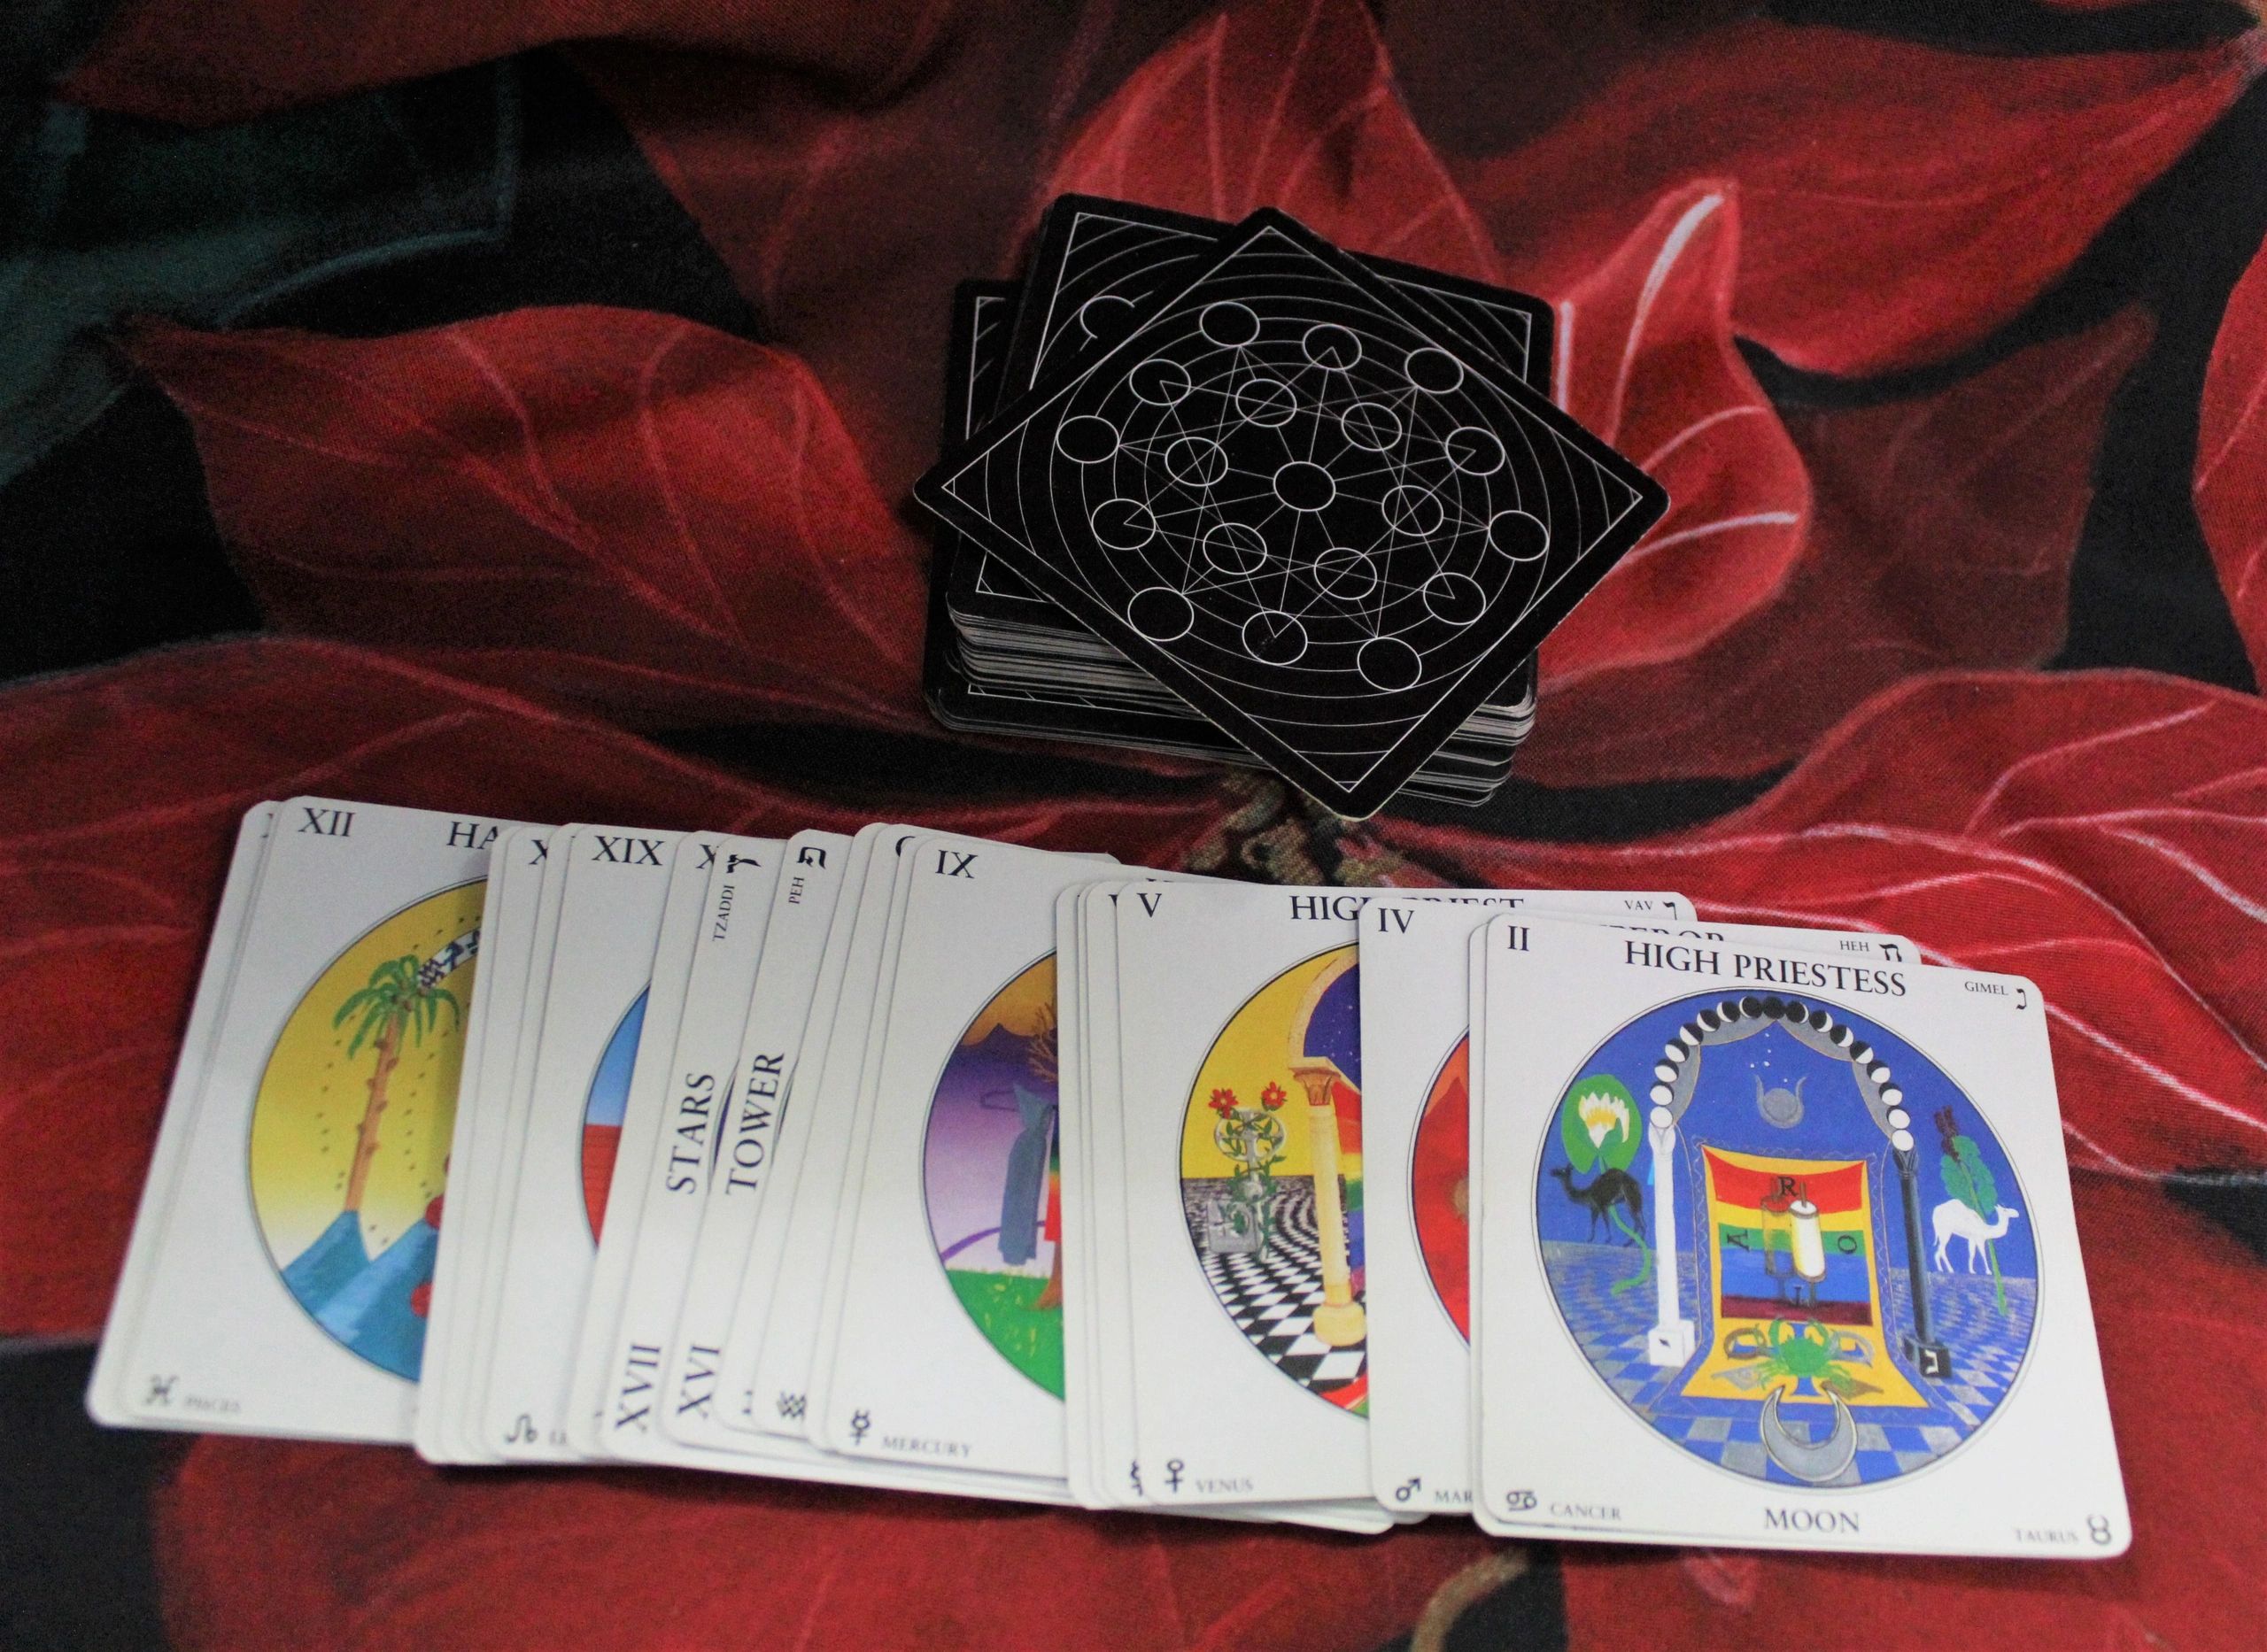 Deck of Tarot cards spread on red cloth